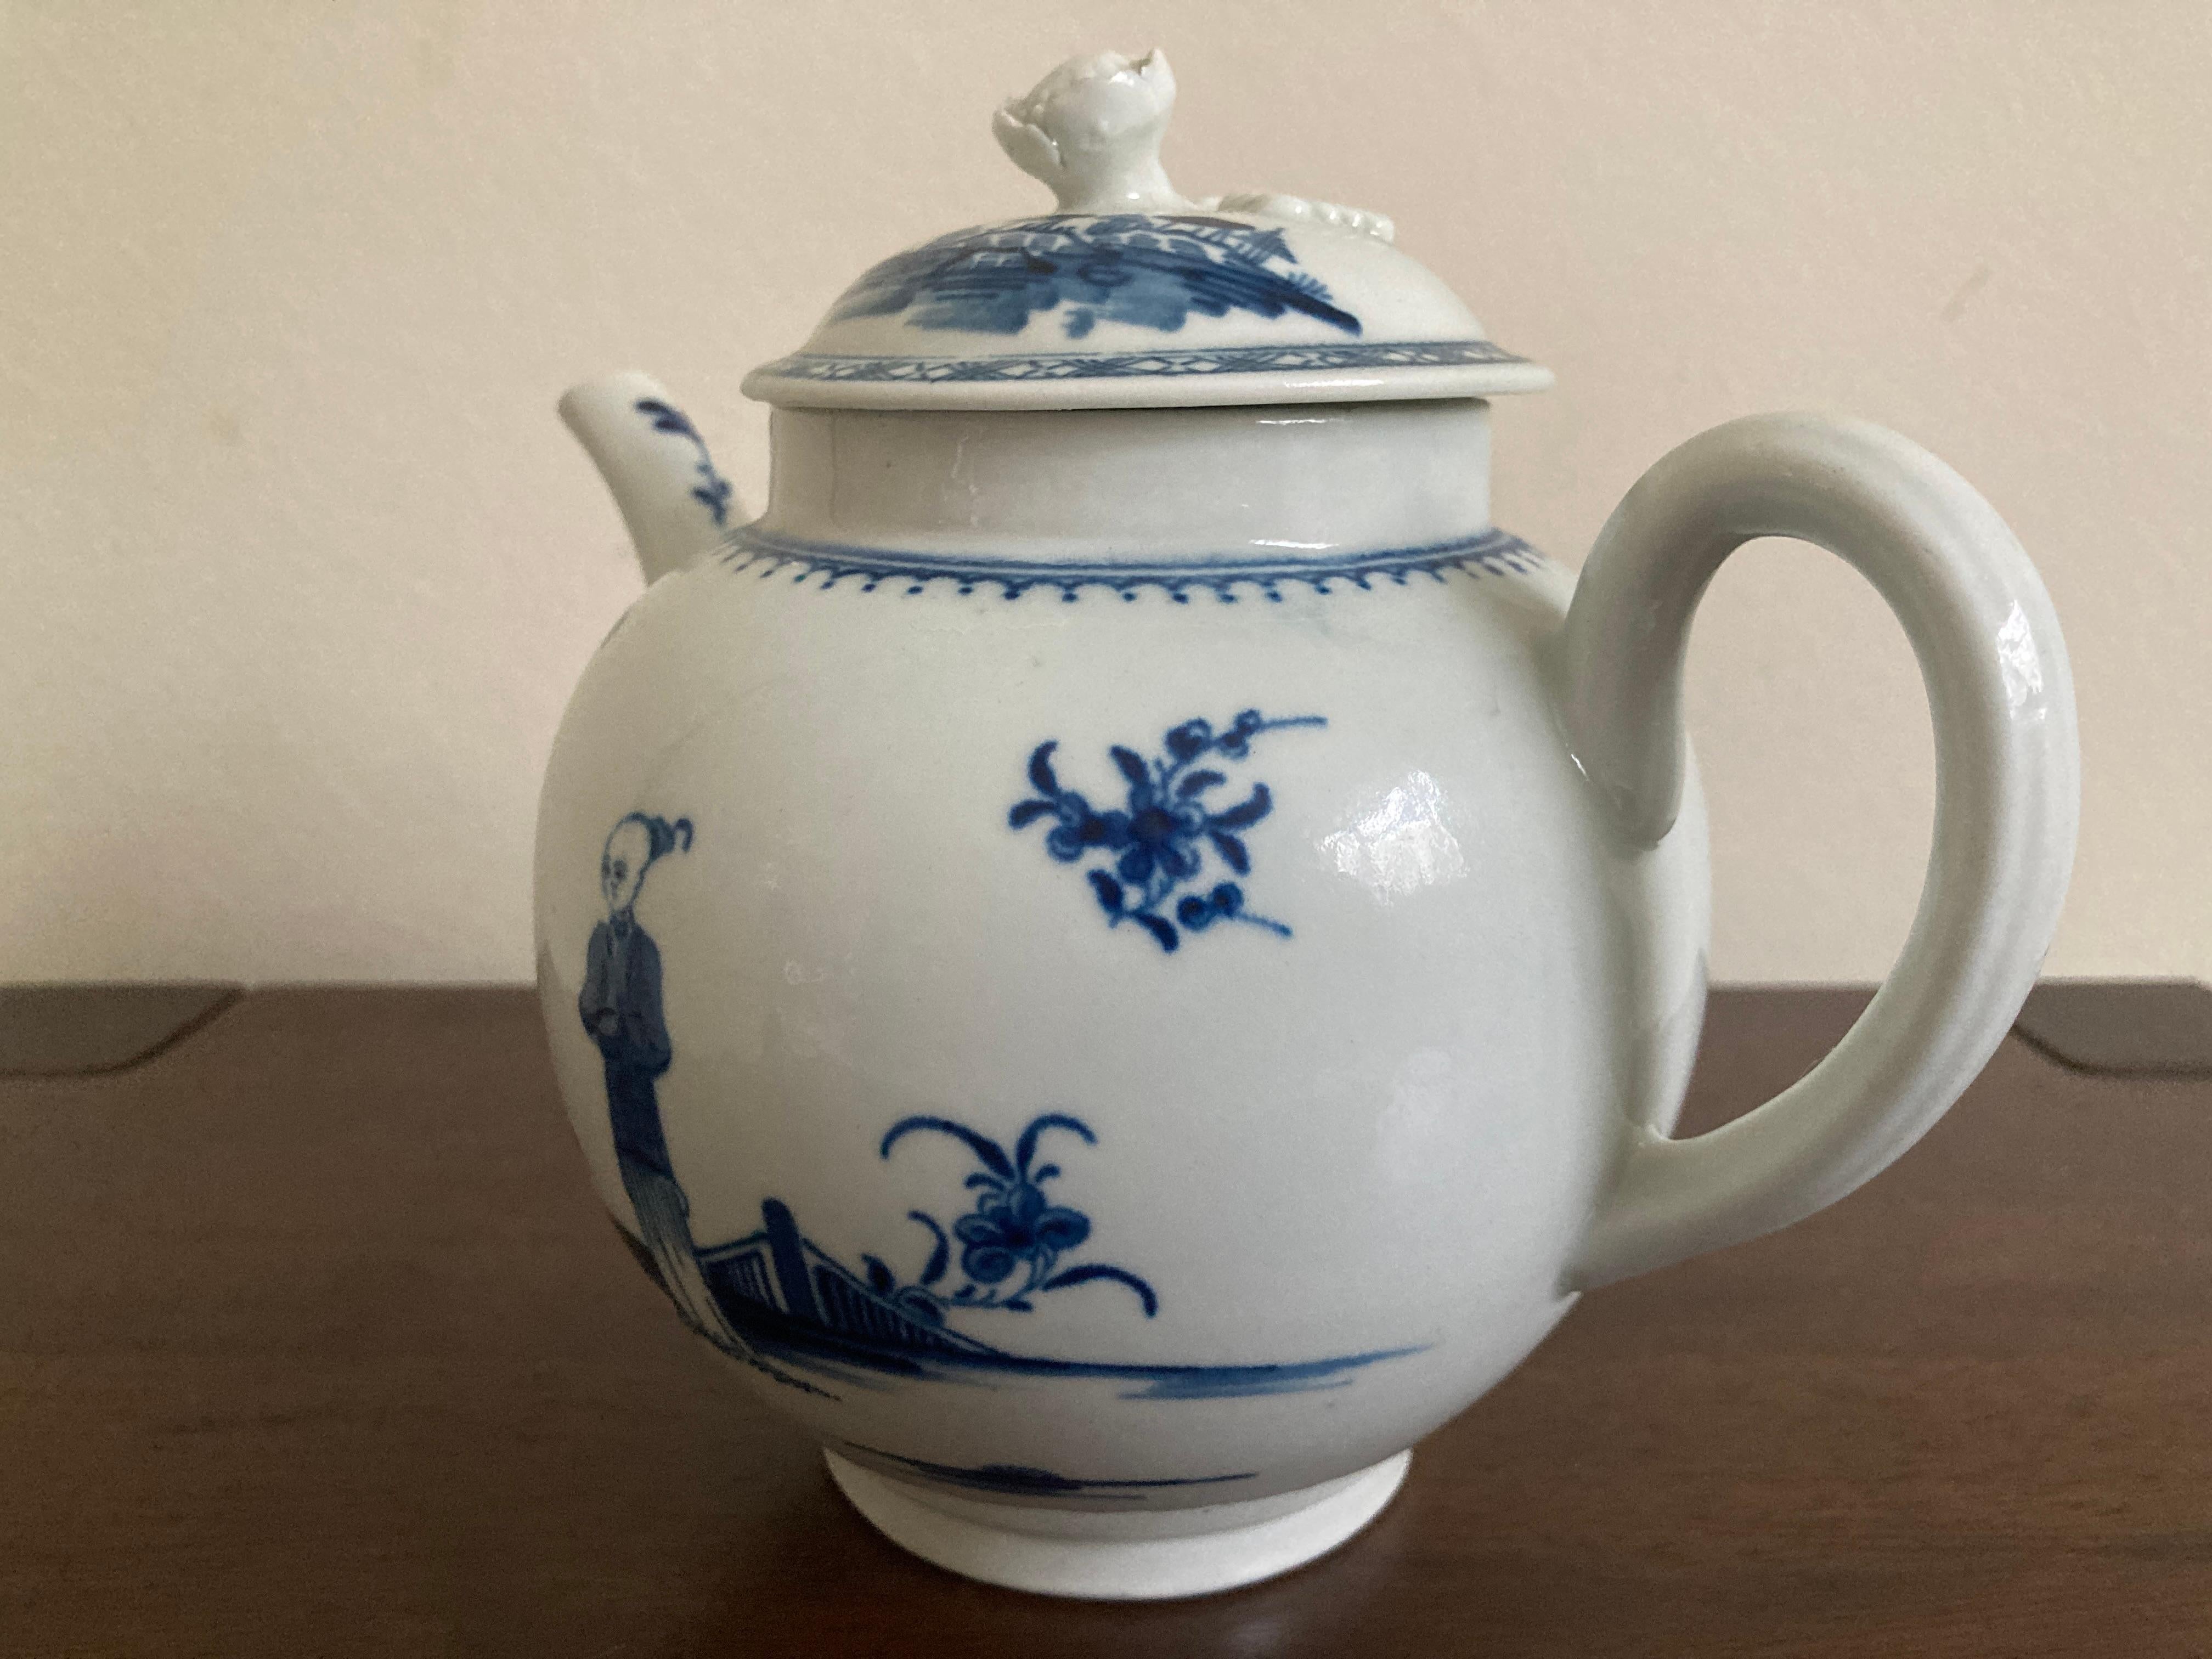 Porcelain First Period Worcester Teapot 'Waiting Chinaman' Pattern circa 1770 For Sale